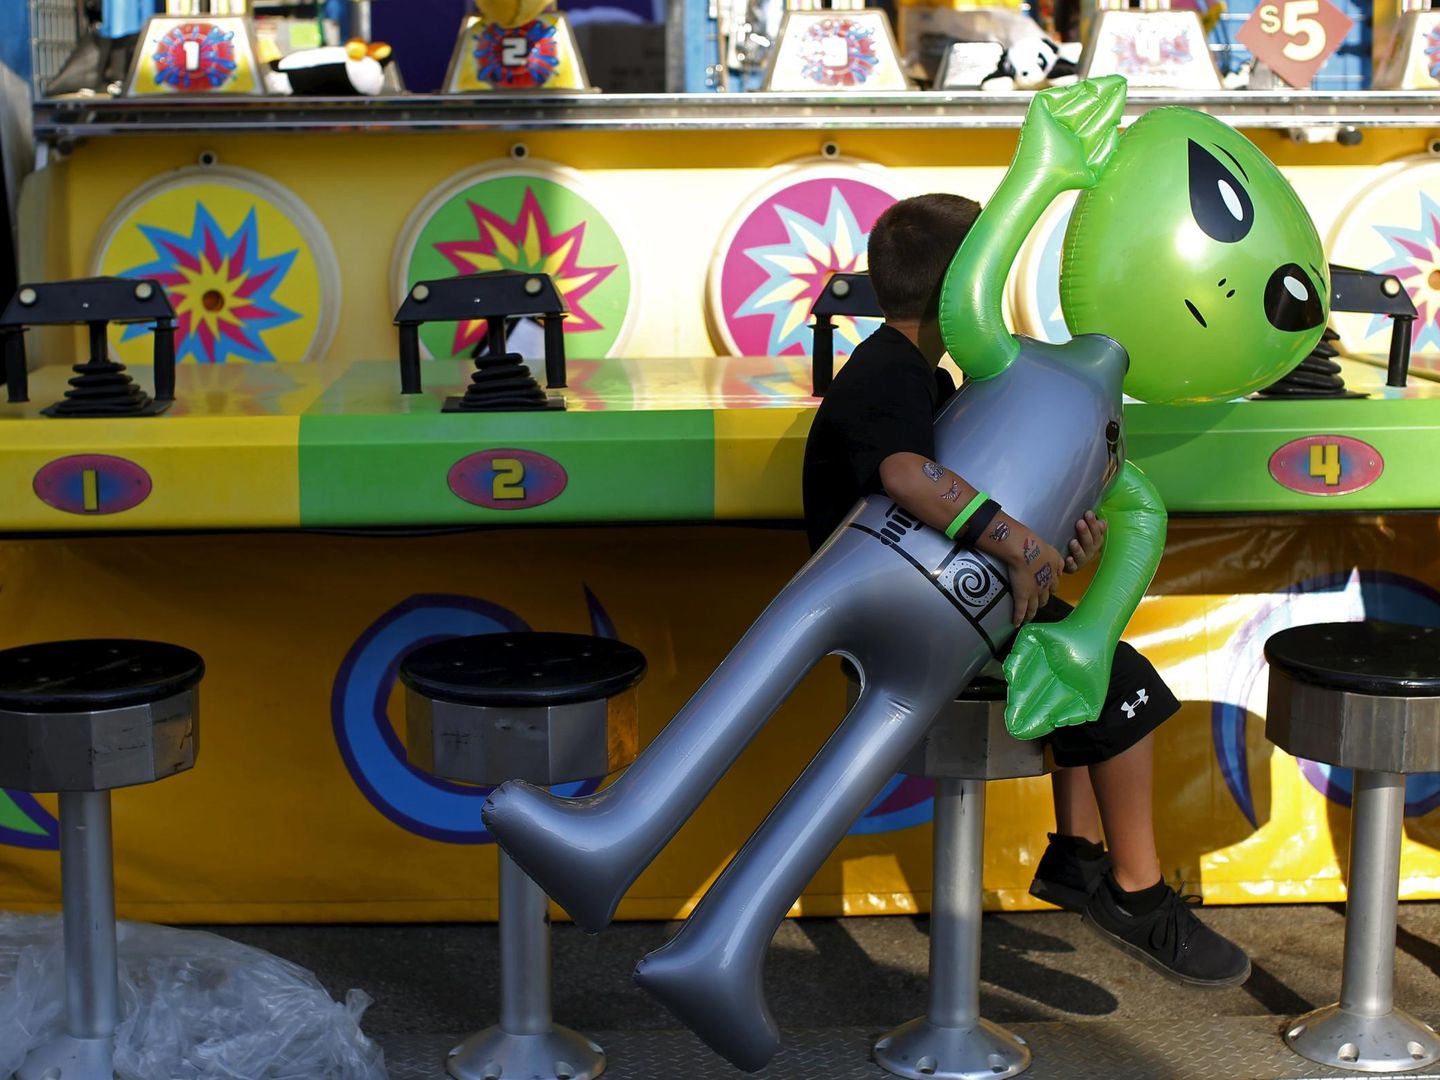 A boy carries an inflatable alien toy prize while sitting on a stool at the Iowa State Fair in Des Moines, Iowa, United States, August 15, 2015.  REUTERS/Jim Young